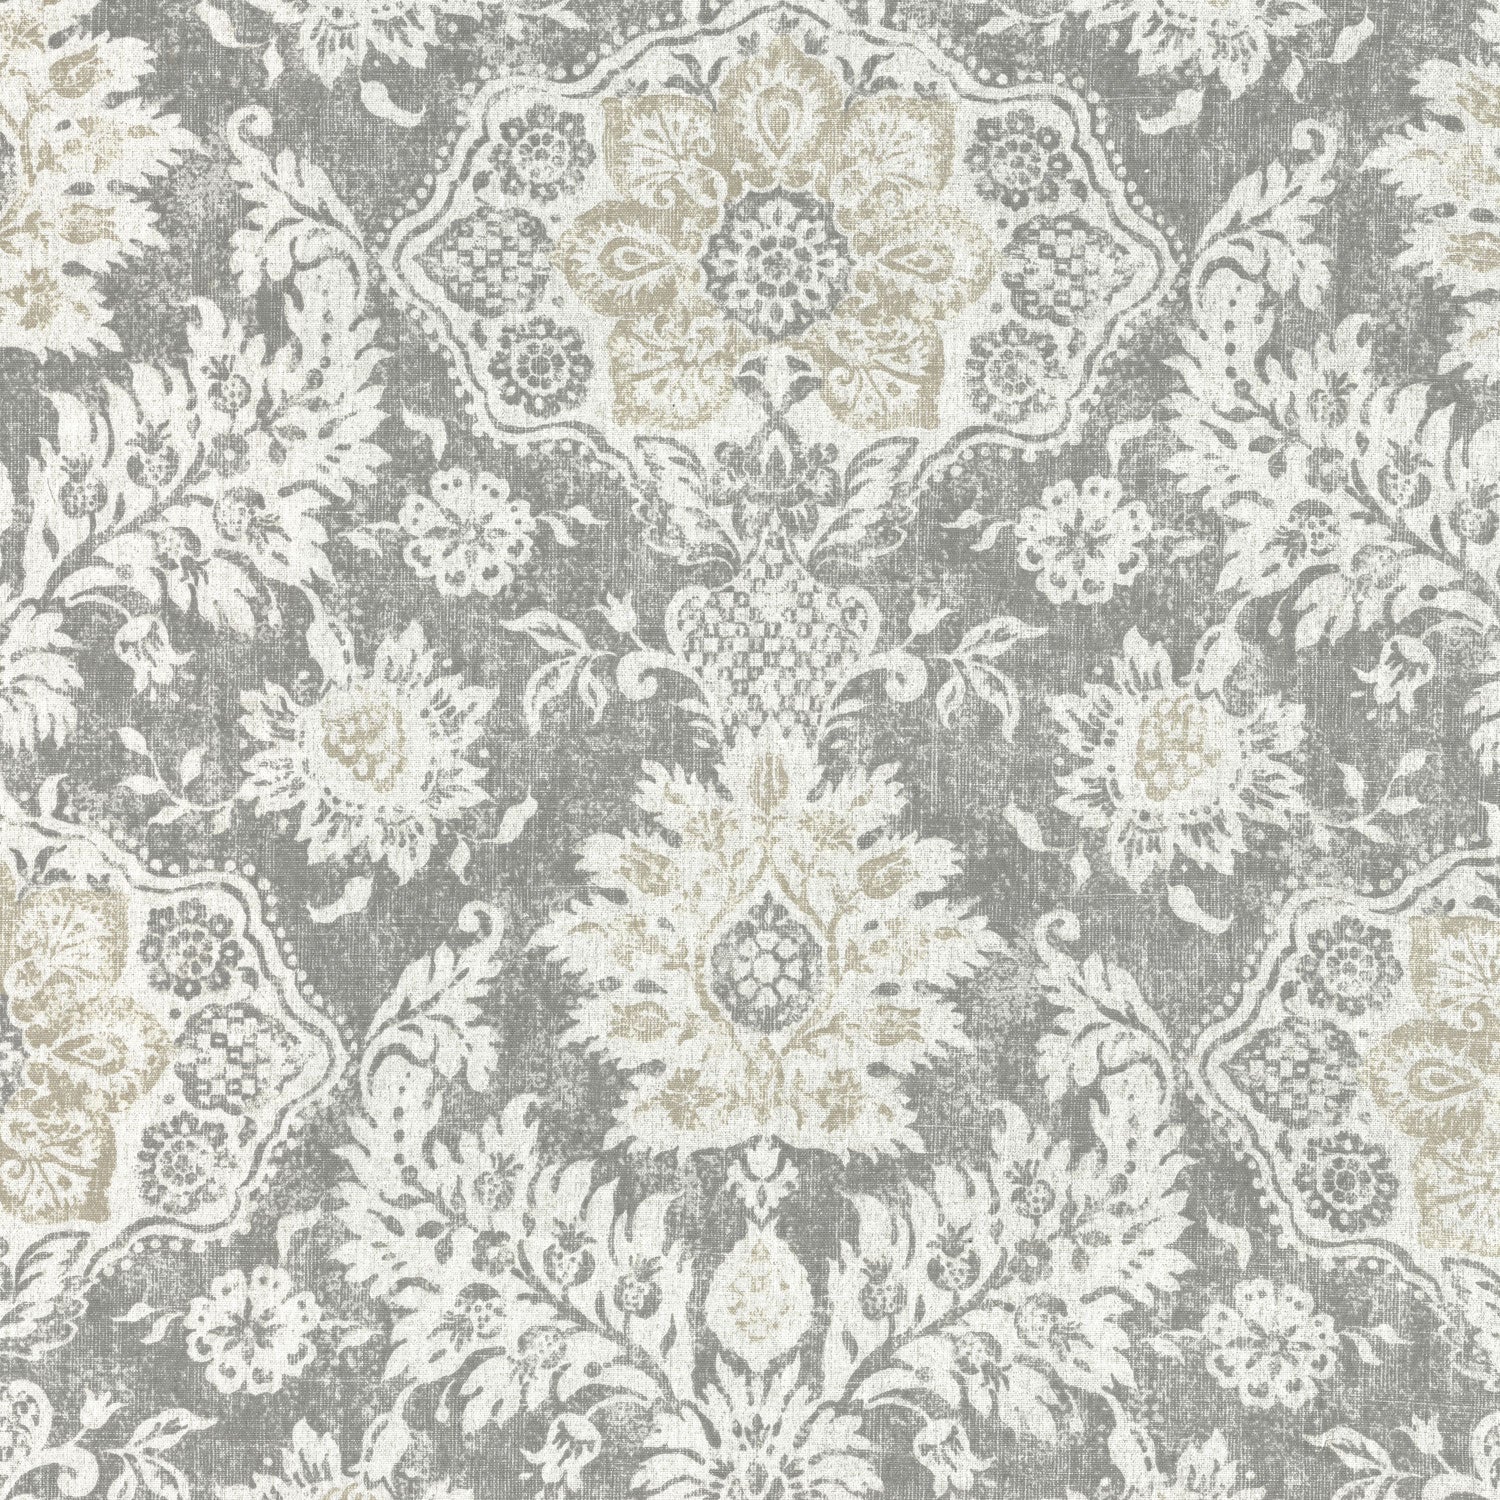 bed scarf in belmont mist pale gray floral damask